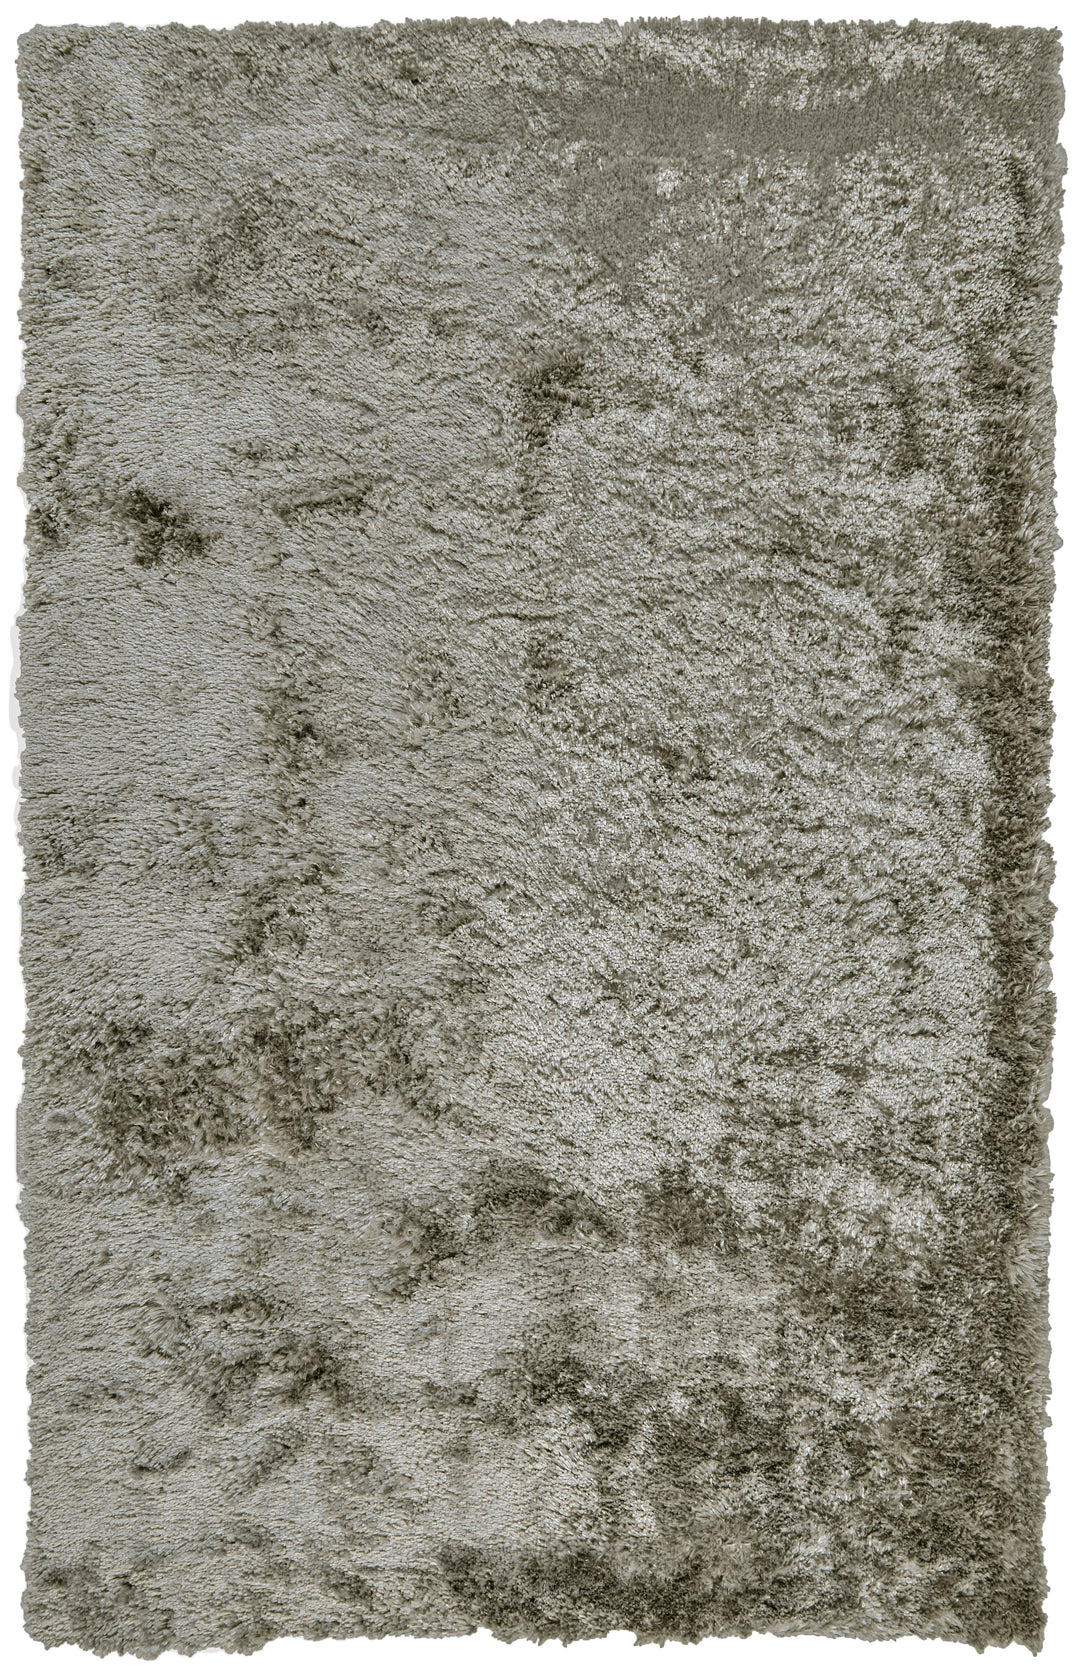 Feizy Feizy Blunham Luxurious Tufted Shag Rug - Lustrous Silver Sage - Available in 5 Sizes 5' x 8' 7494116FSLV000E10